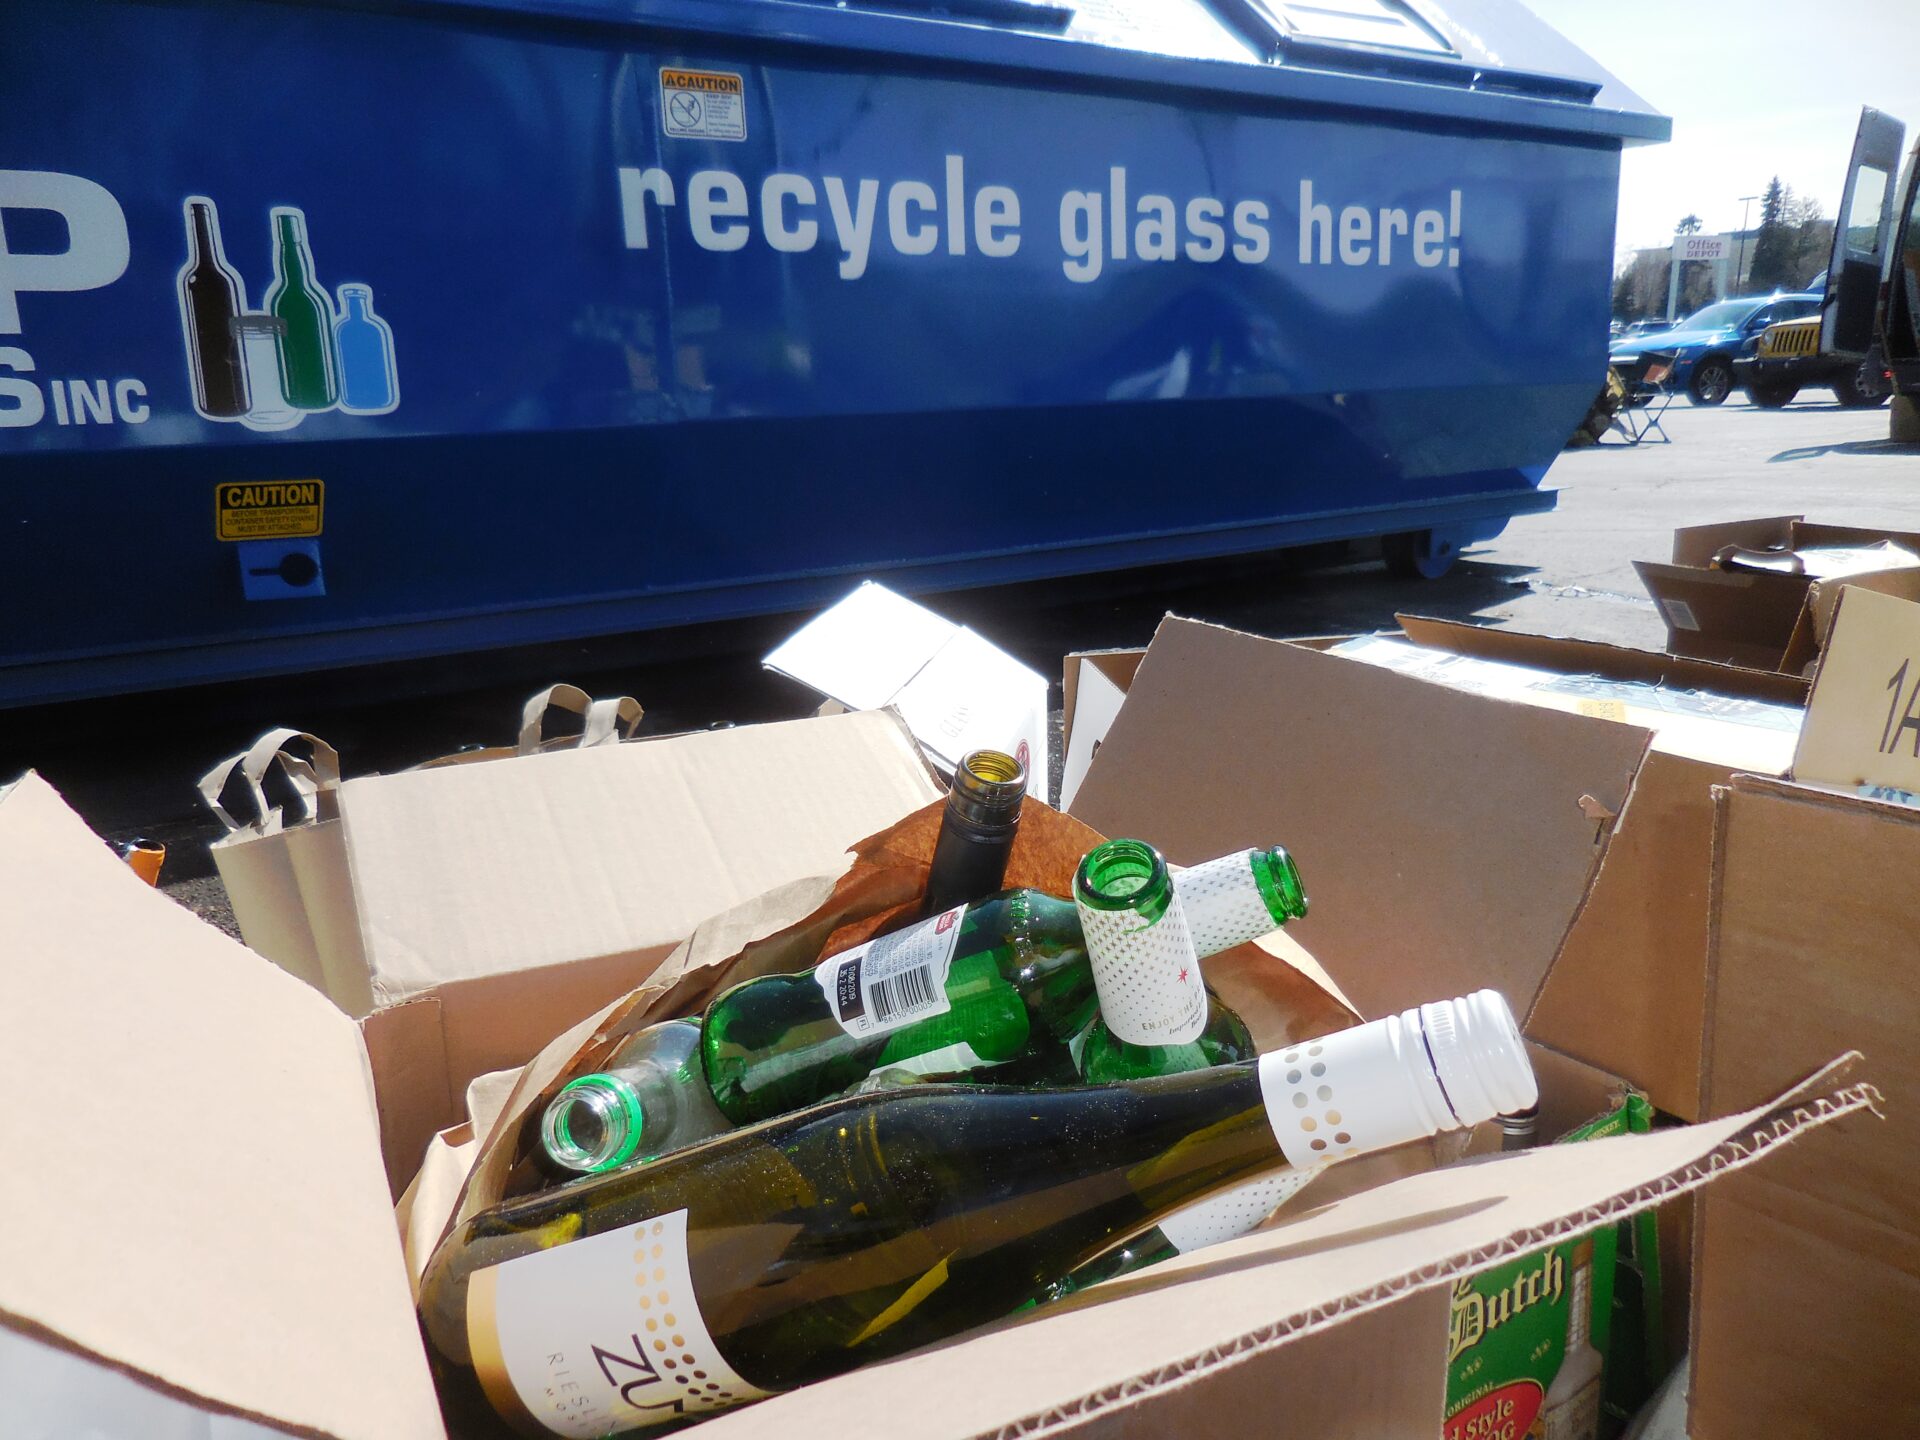 PRC Glass Recycling Recycle Glass Here Dumpster Scaled 